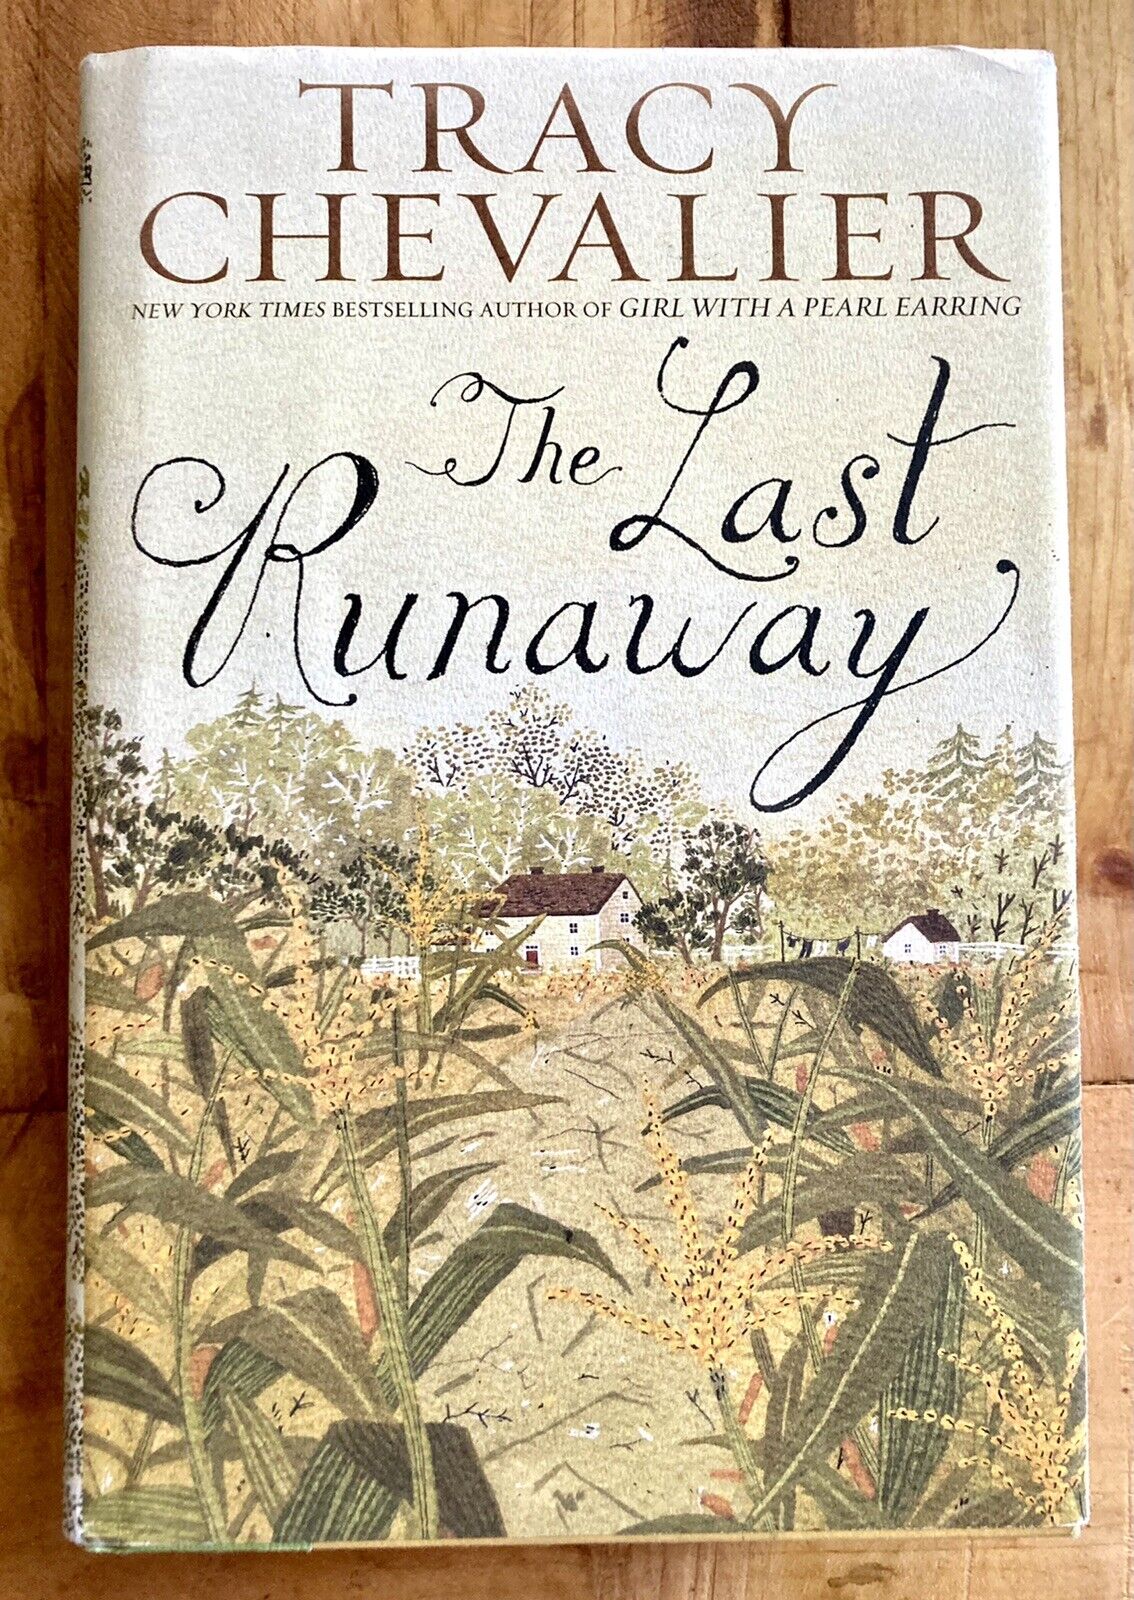 The Last Runaway by Tracy Chevalier (2013, Hardcover) First Printing Novel Good